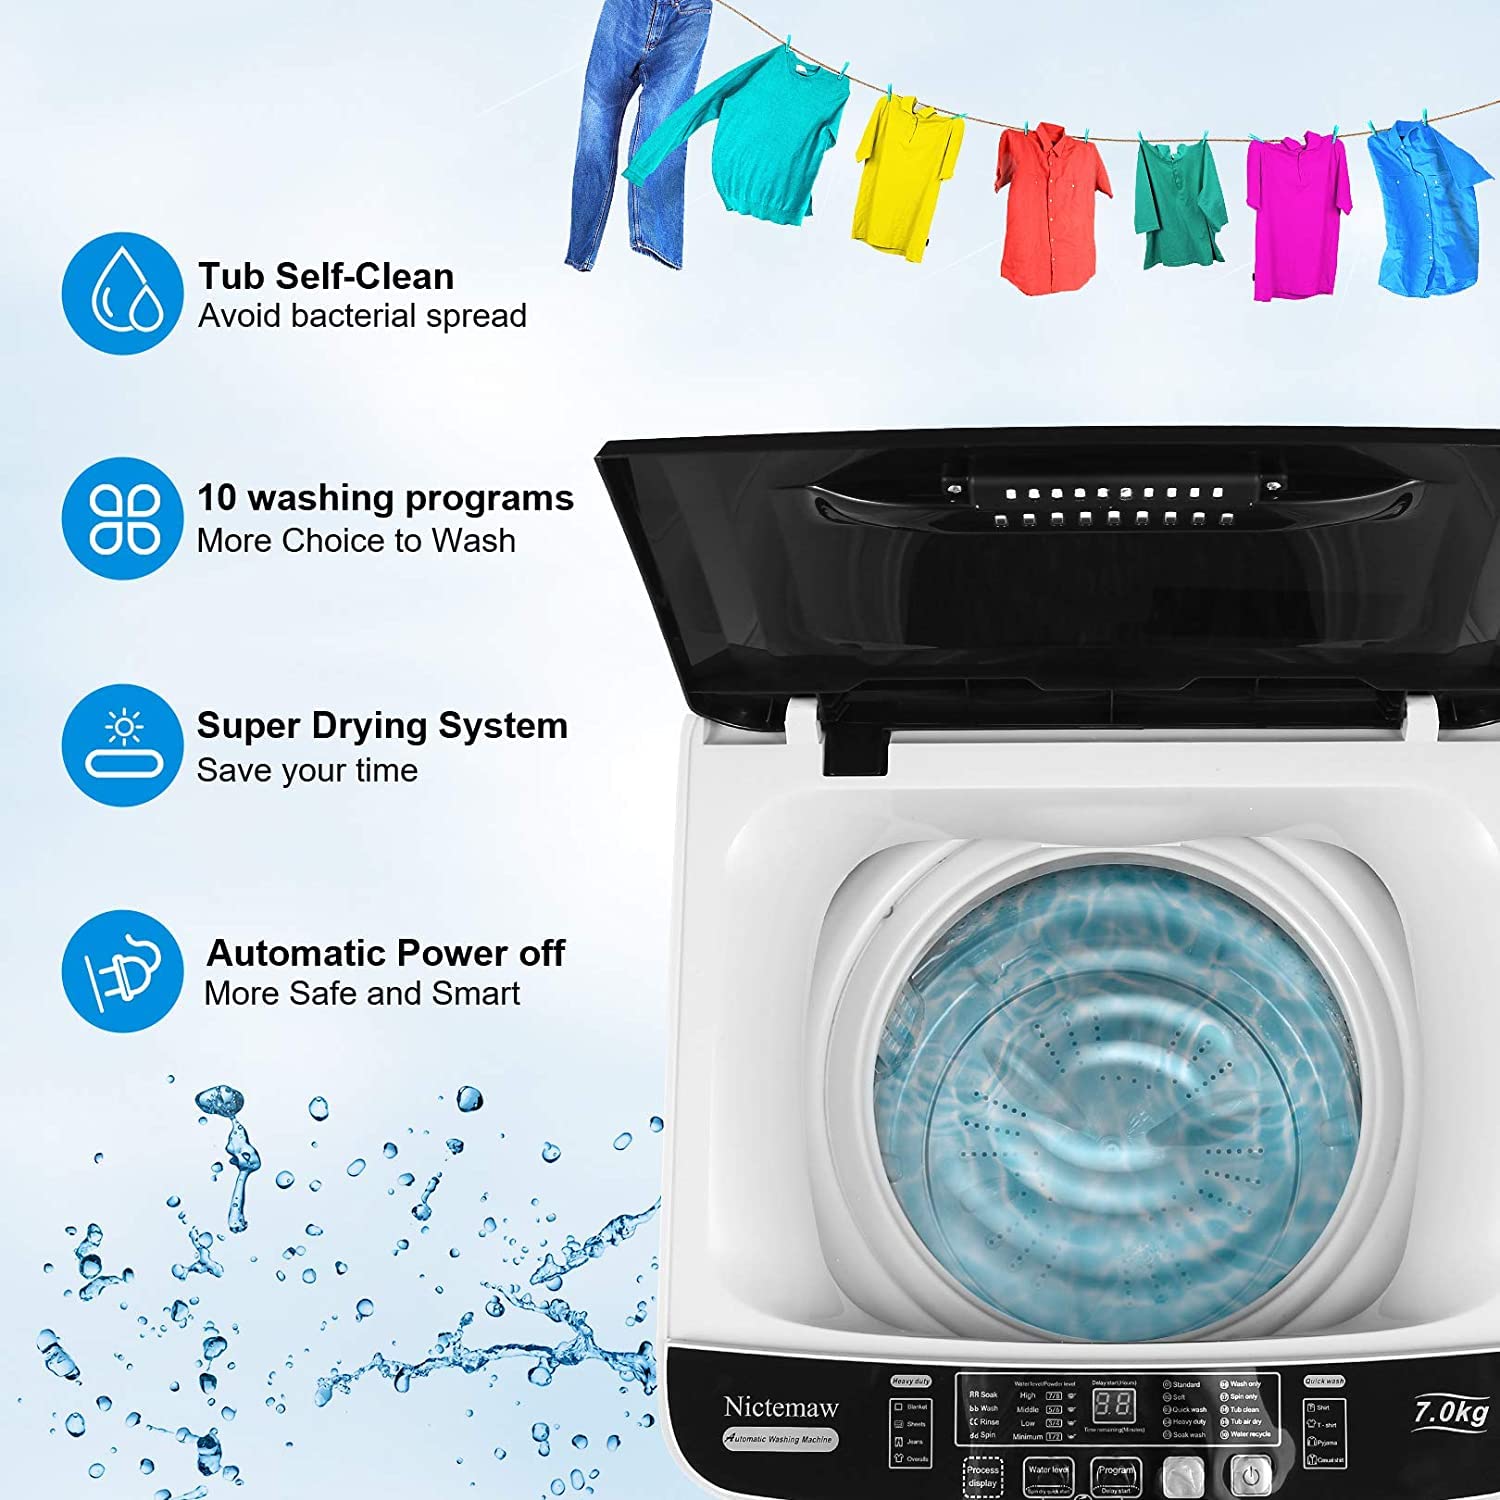 Nictemaw Portable Washing Machine, 17.8Lbs Capacity Full-Automatic Portable Washer, 2.4Cu.ft Washer and Dryer Combo with Drain Pump, 10 Programs 8 Water Levels Compact Laundry Washer for Apartment RV